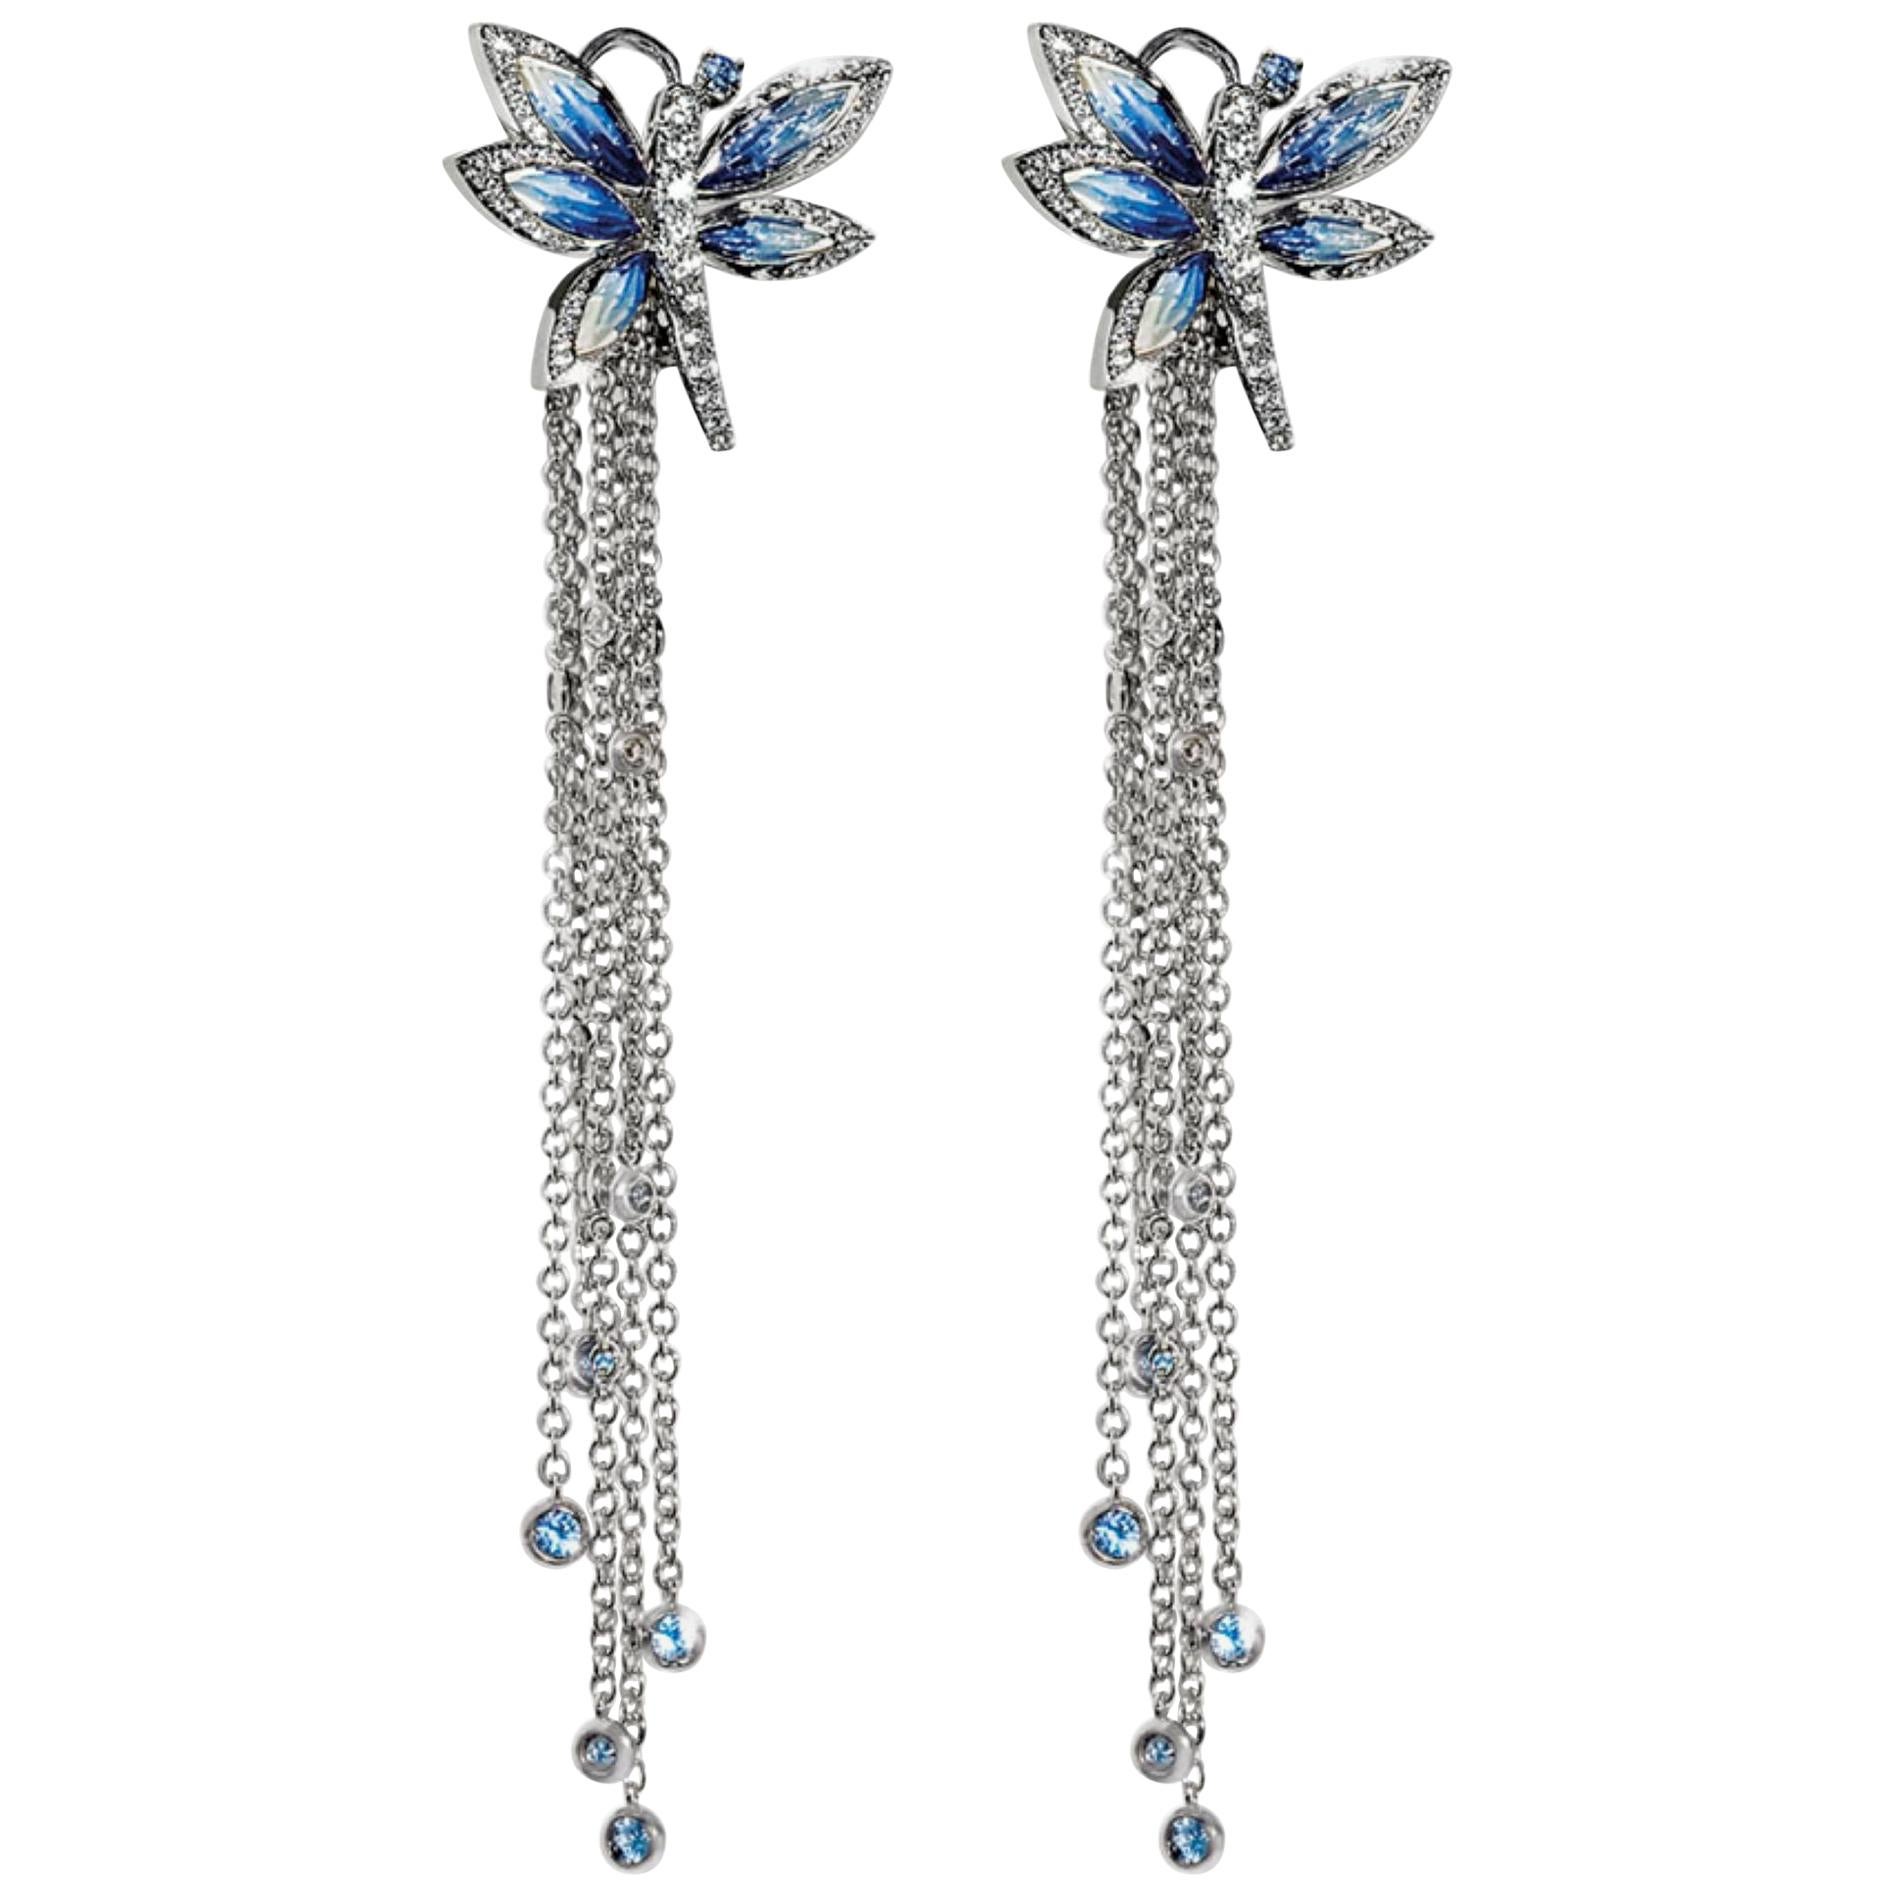 Earrings White Gold White Diamonds Sapphires Hand Decoated with Micro Mosaic For Sale